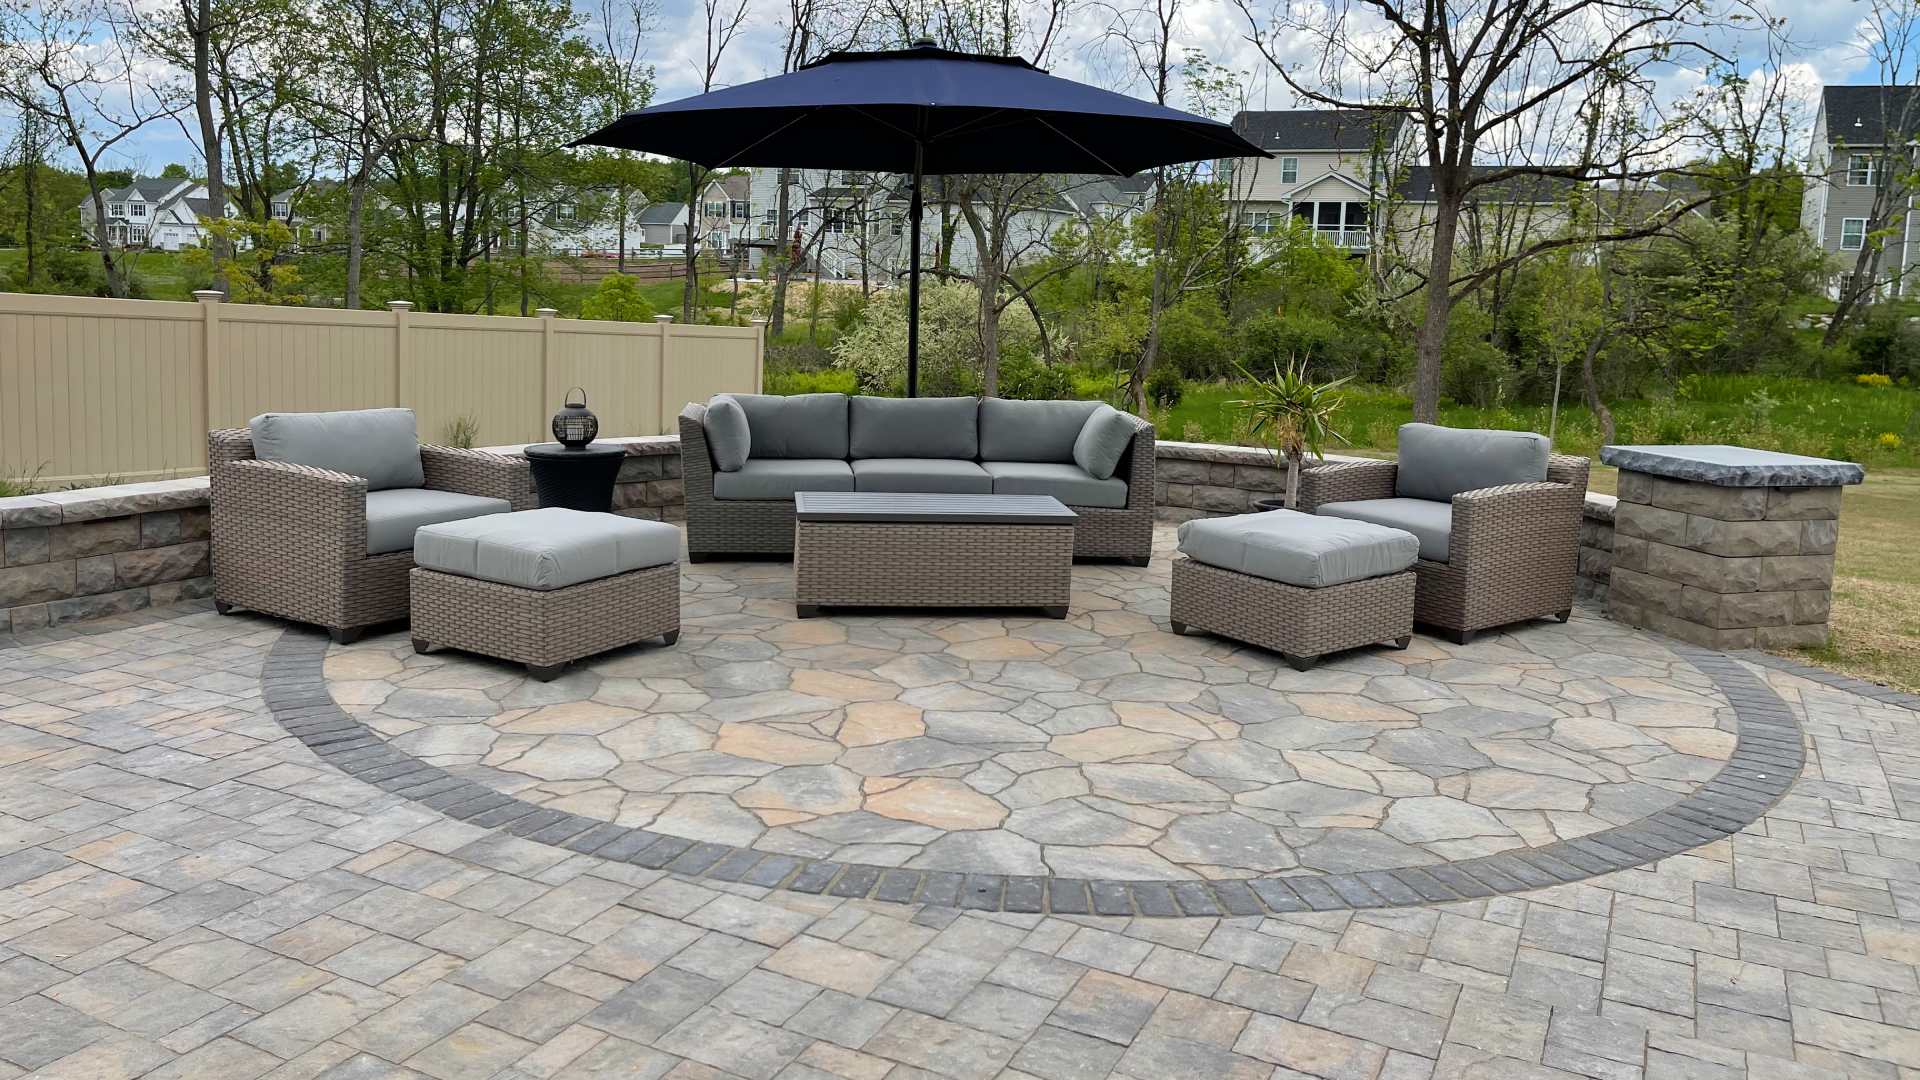 Custom stone patio built with seating wall in Clinton, NJ.